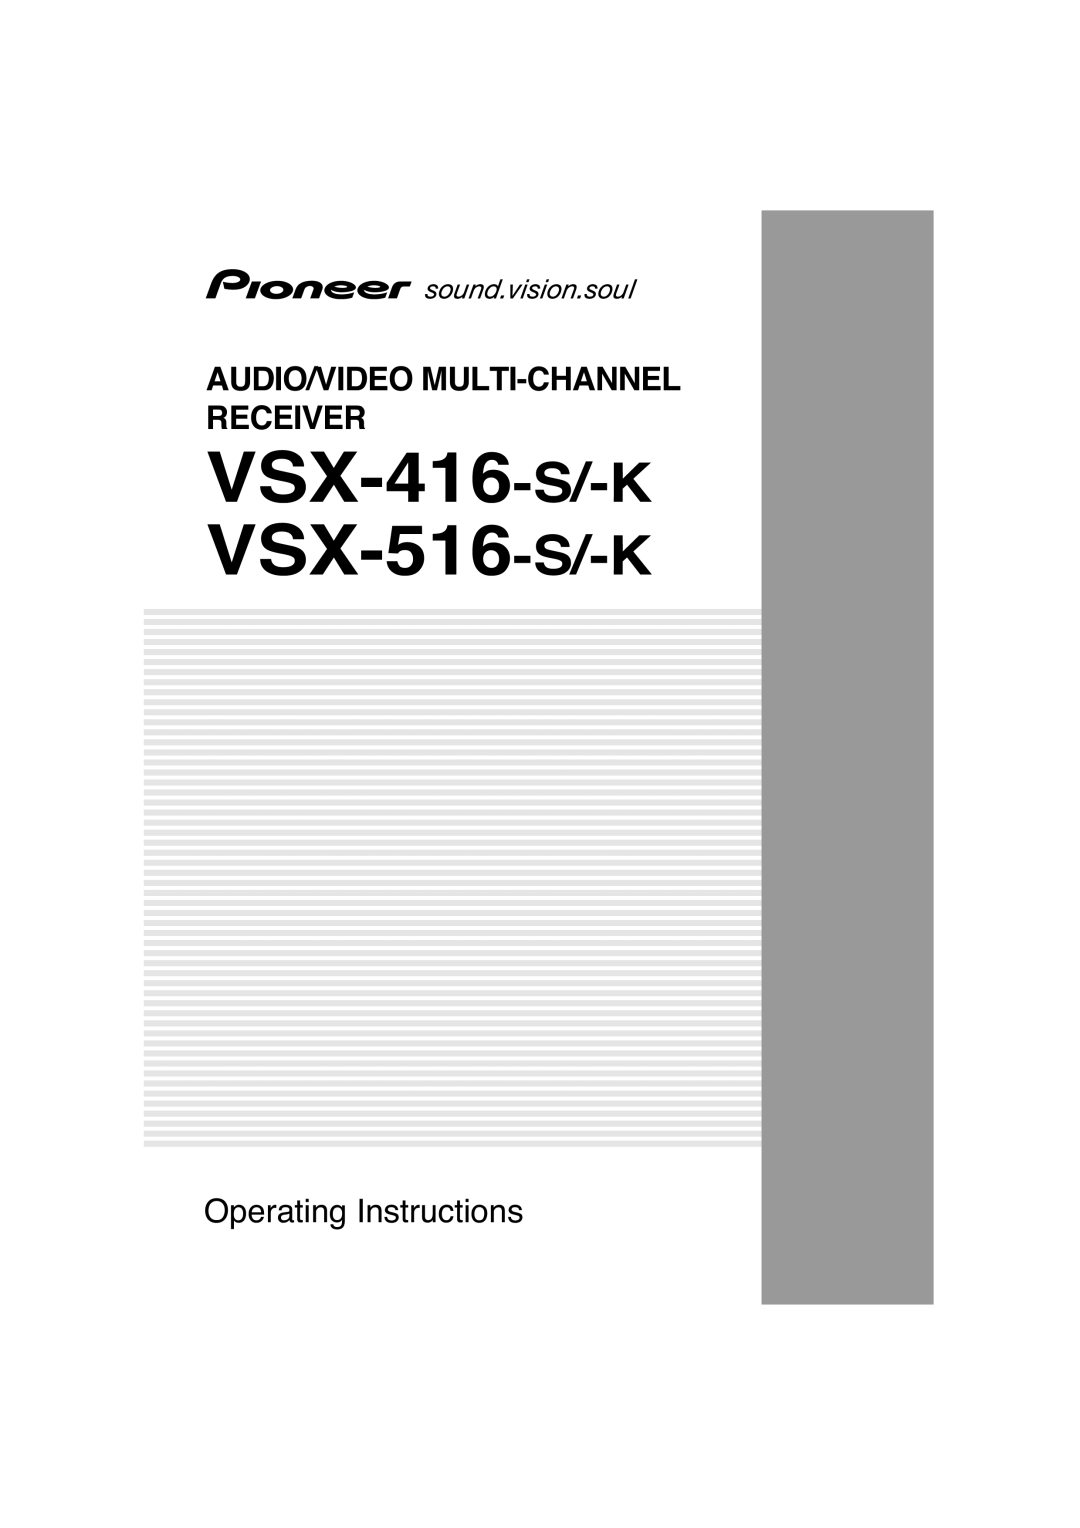 Pioneer operating instructions VSX-416-S/-K VSX-516-S/-K, Audio/Video Multi-Channel Receiver, Operating Instructions 